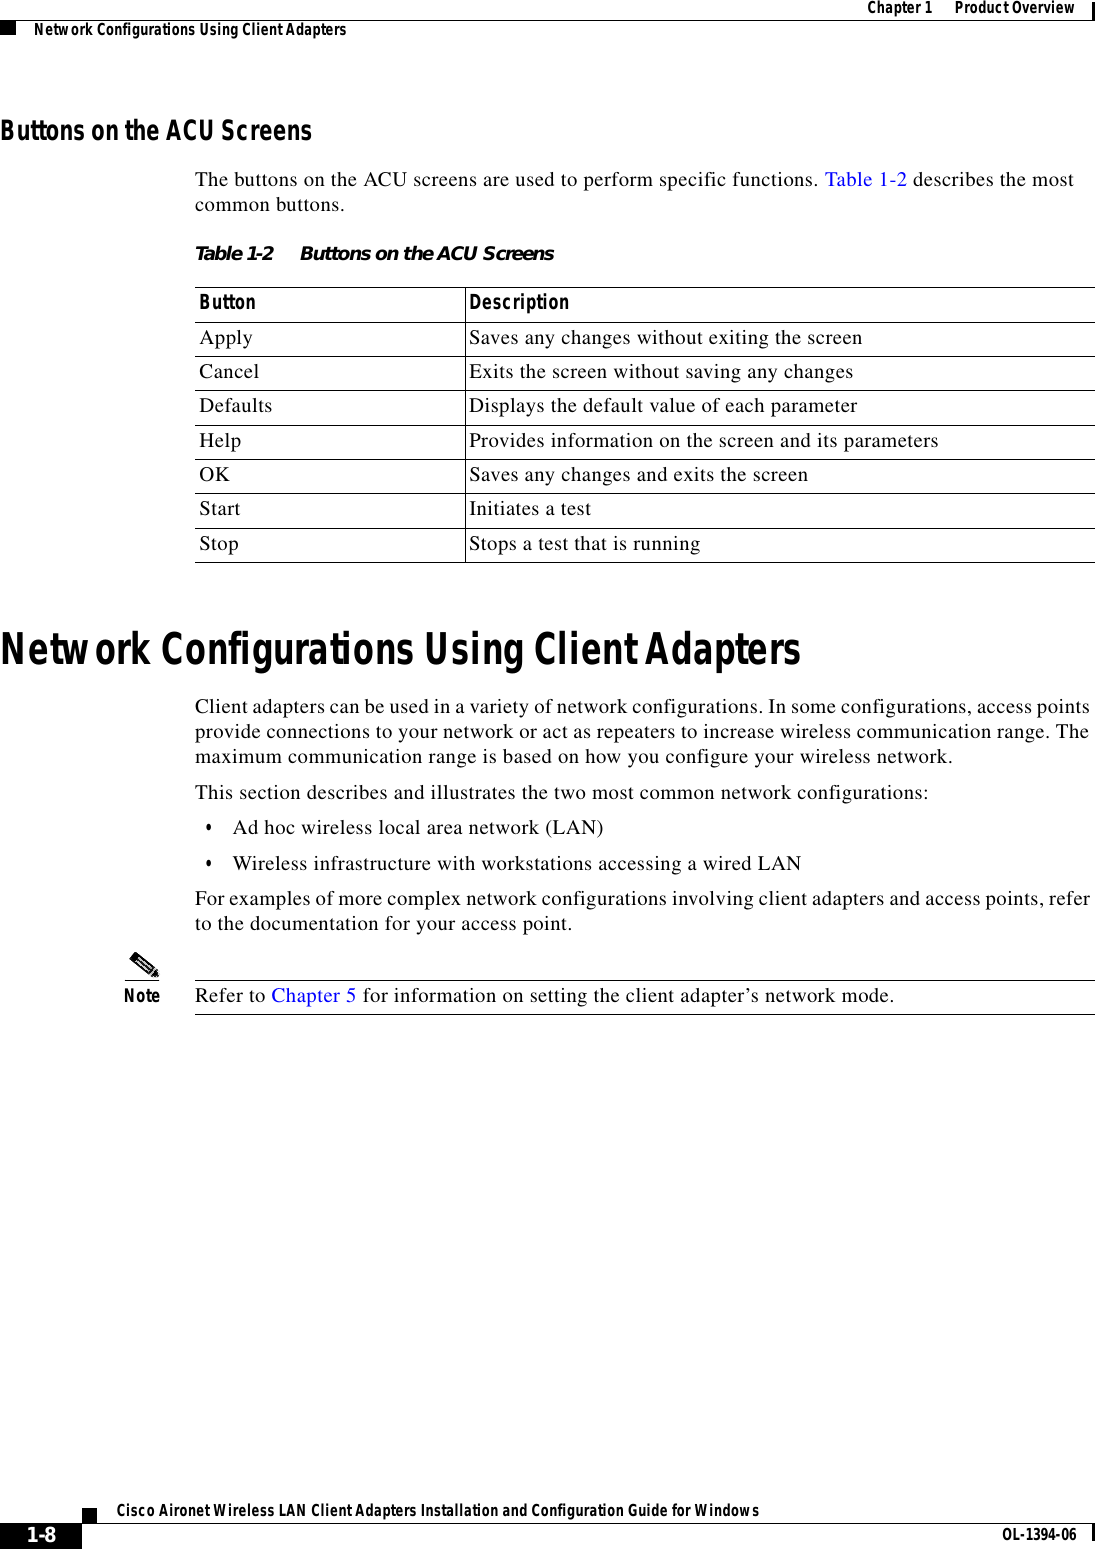 1-8Cisco Aironet Wireless LAN Client Adapters Installation and Configuration Guide for Windows OL-1394-06Chapter 1      Product OverviewNetwork Configurations Using Client AdaptersButtons on the ACU ScreensThe buttons on the ACU screens are used to perform specific functions. Table 1-2 describes the most common buttons.Network Configurations Using Client AdaptersClient adapters can be used in a variety of network configurations. In some configurations, access points provide connections to your network or act as repeaters to increase wireless communication range. The maximum communication range is based on how you configure your wireless network.This section describes and illustrates the two most common network configurations:•Ad hoc wireless local area network (LAN)•Wireless infrastructure with workstations accessing a wired LANFor examples of more complex network configurations involving client adapters and access points, refer to the documentation for your access point.Note Refer to Chapter 5 for information on setting the client adapter’s network mode.Table 1-2 Buttons on the ACU ScreensButton DescriptionApply Saves any changes without exiting the screenCancel Exits the screen without saving any changesDefaults Displays the default value of each parameterHelp Provides information on the screen and its parametersOK Saves any changes and exits the screenStart Initiates a testStop Stops a test that is running